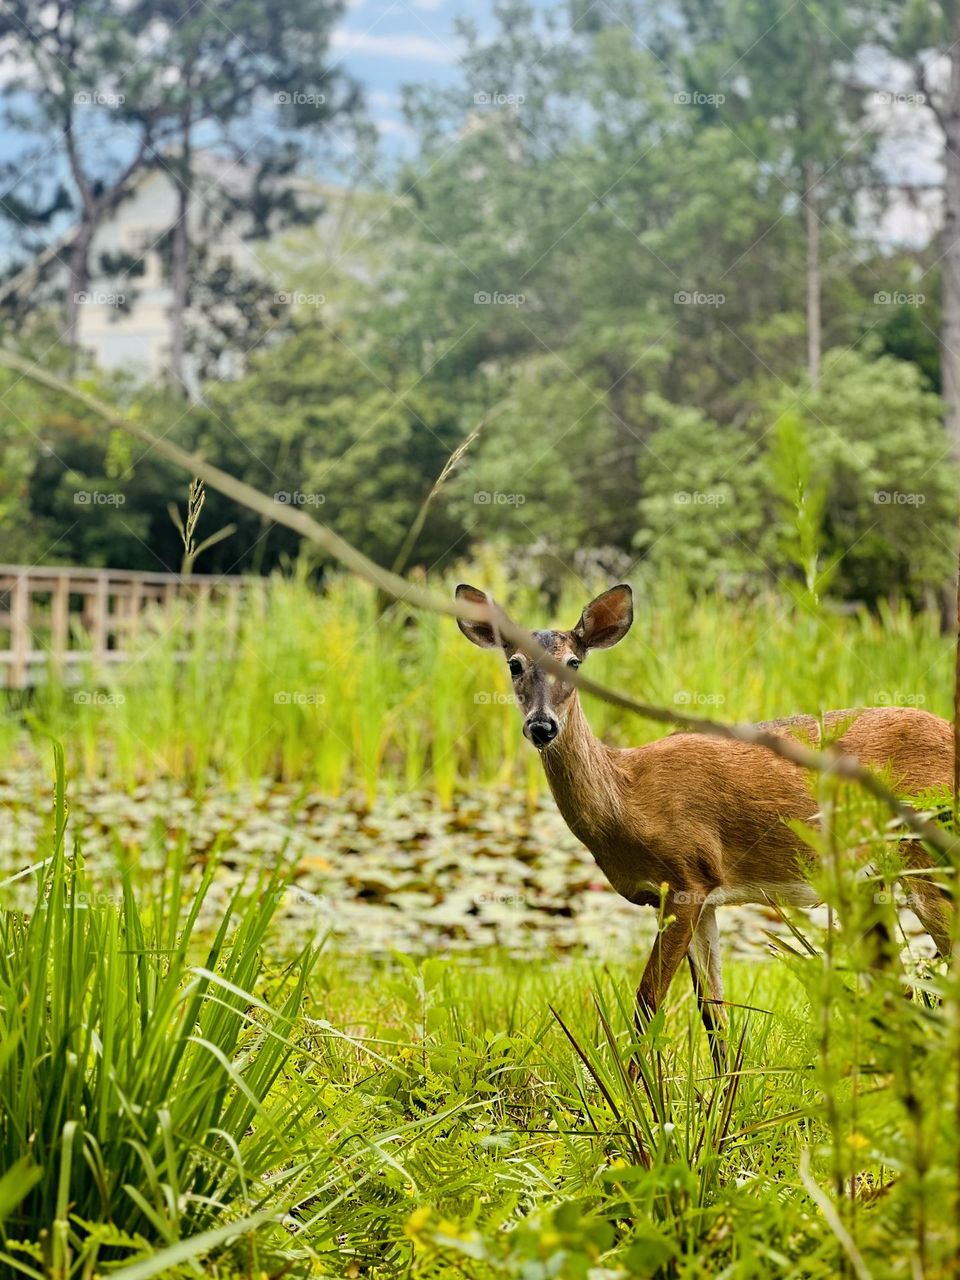 Eye contact with a wild whitetail female deer at the edge of a marshy lily pond.